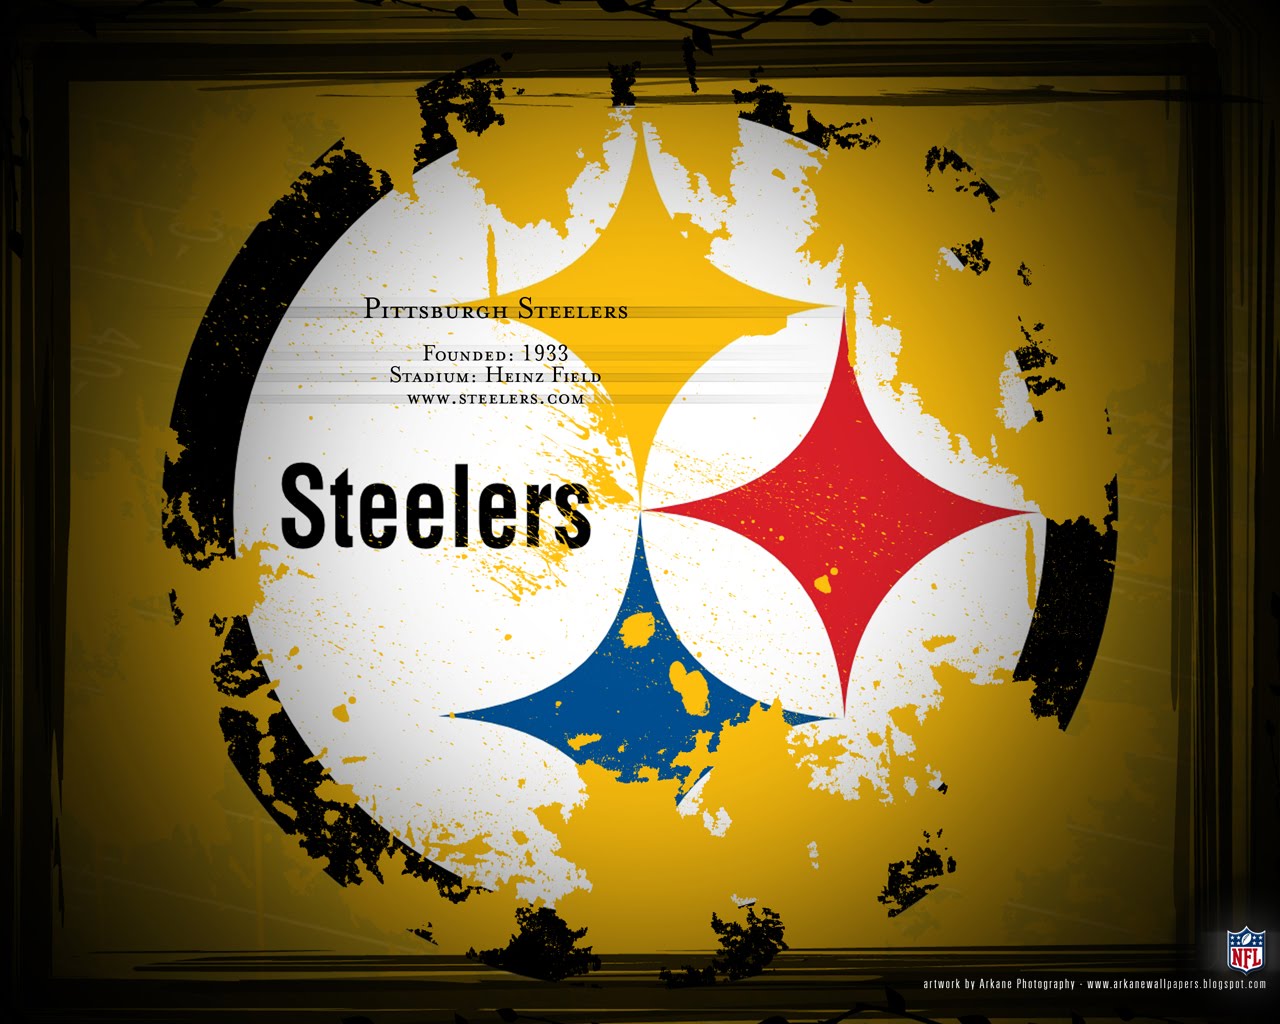 This New Pittsburgh Steelers Desktop Background